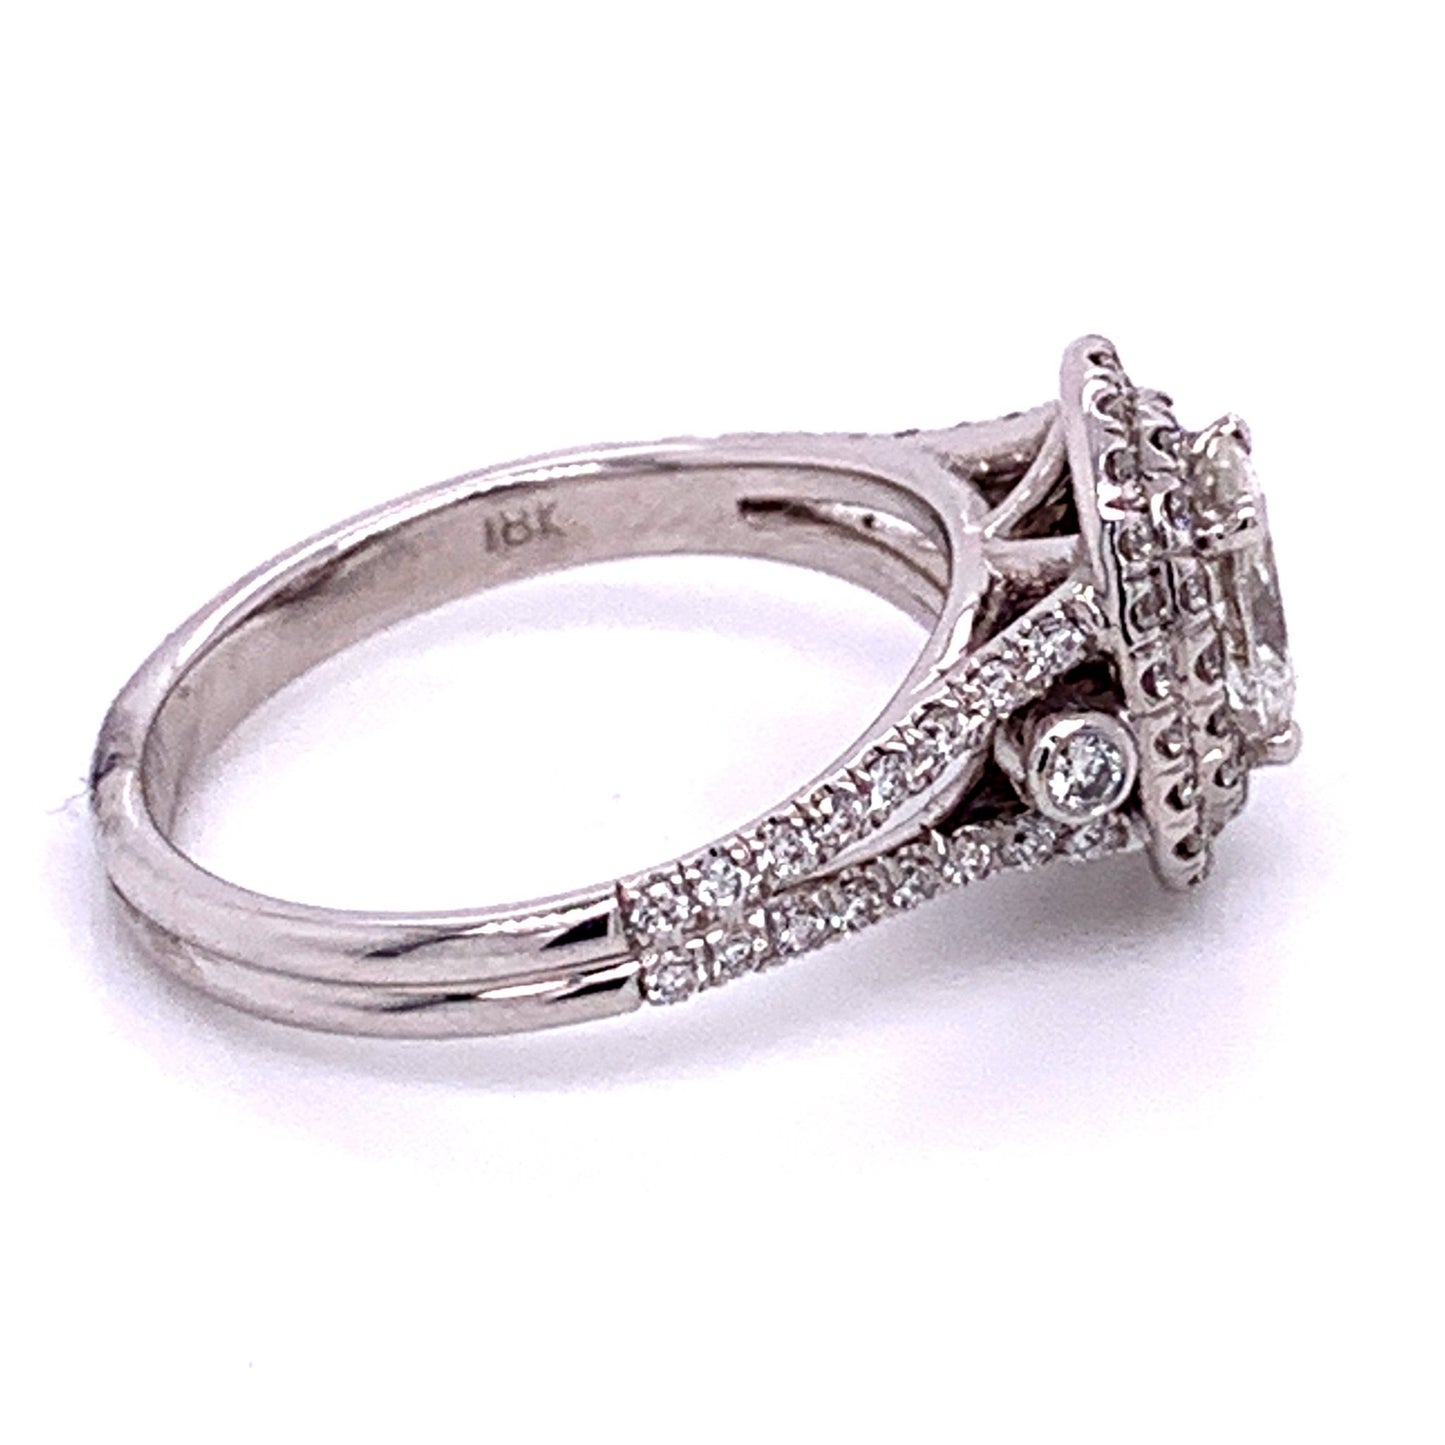 Oval Halo Diamond Engagement Ring in 18K White Gold